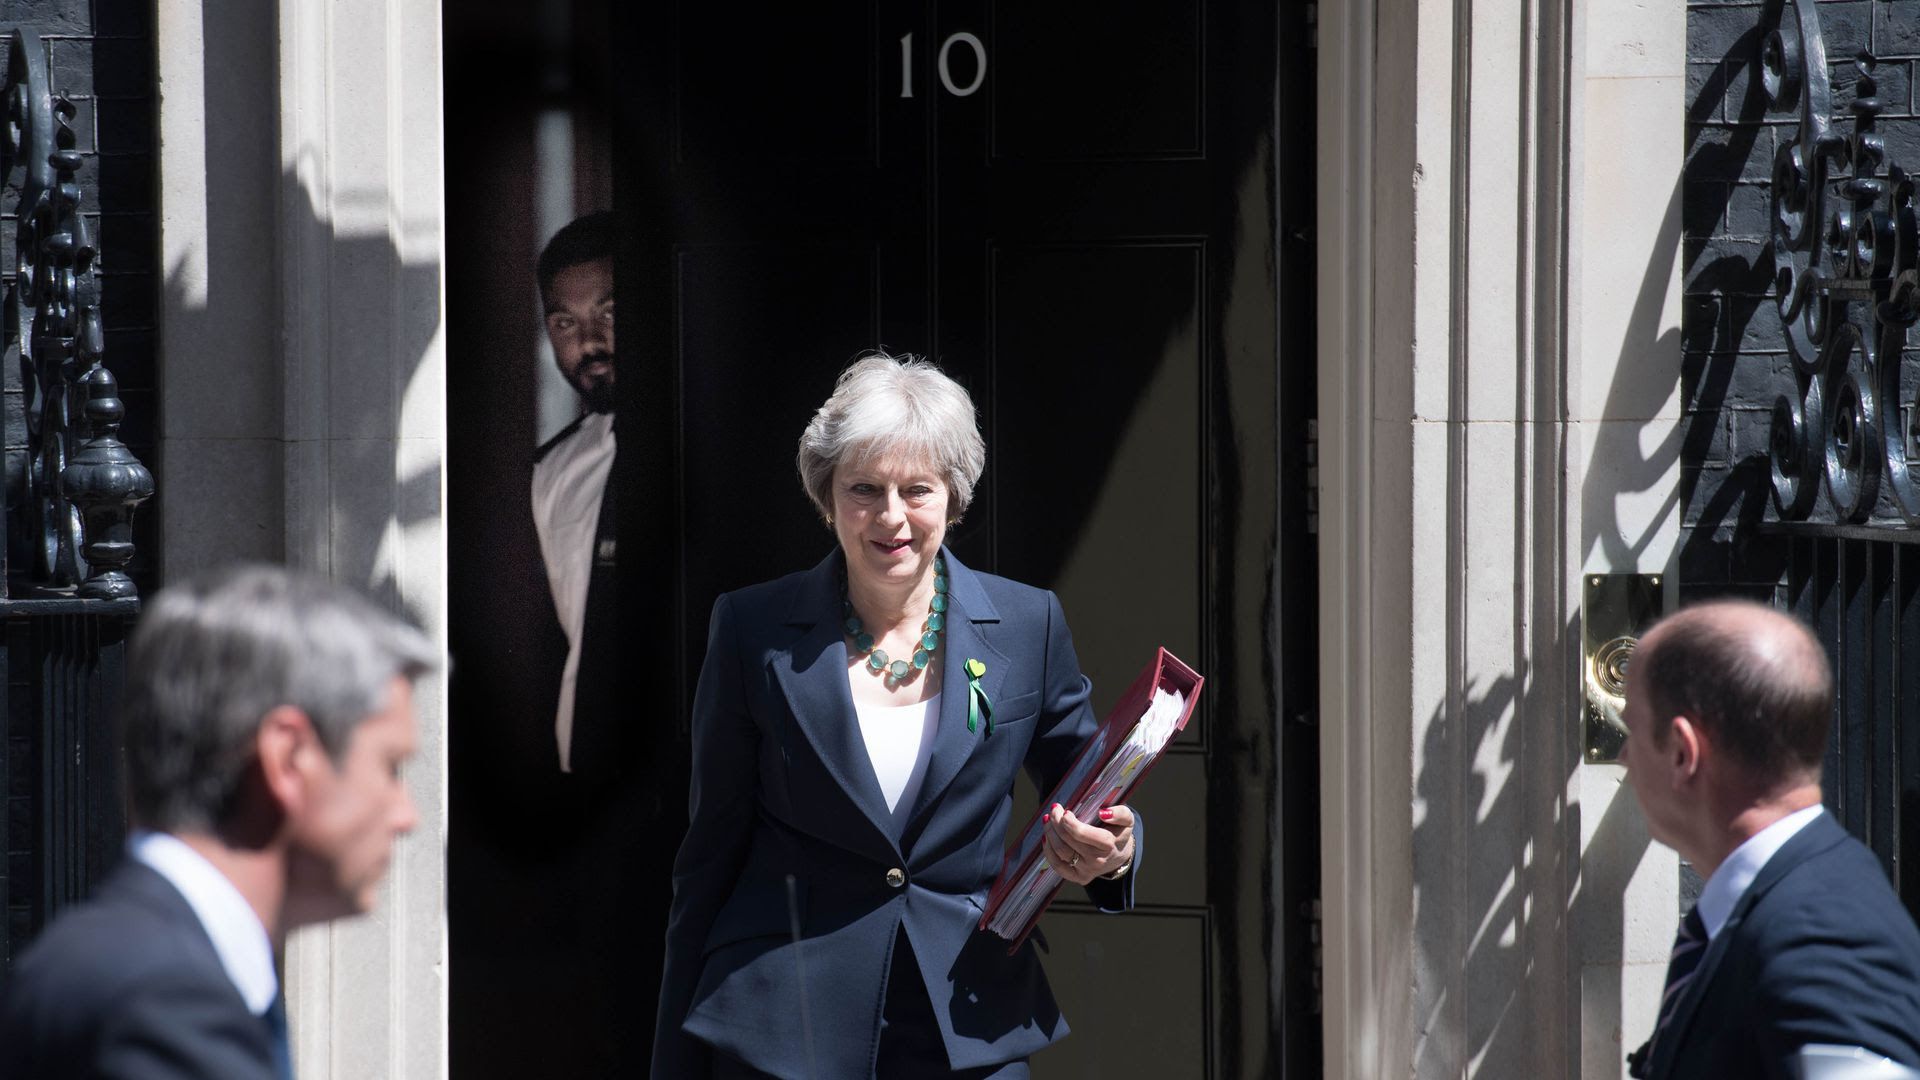 Theresa May walks down the stairs outside Number 10 in England